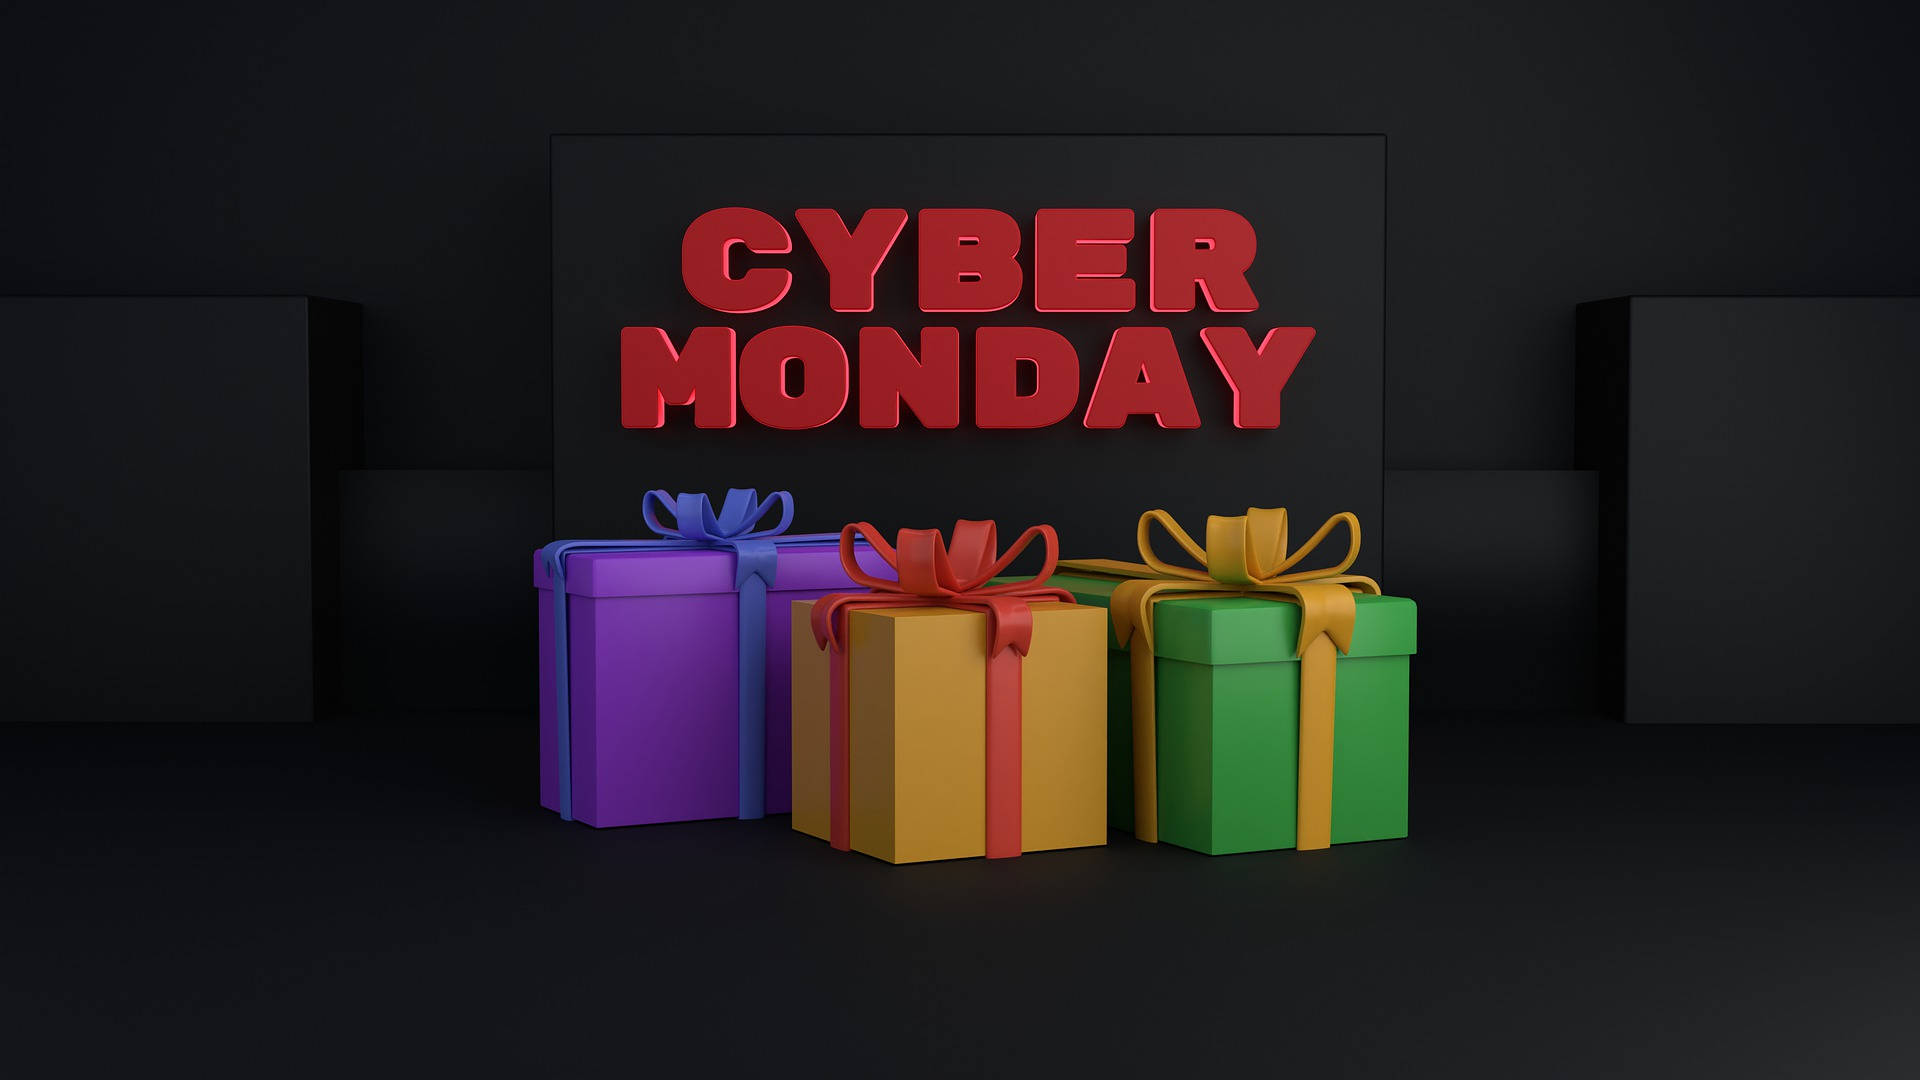 Cyber Monday Gifts And Presents Wallpaper